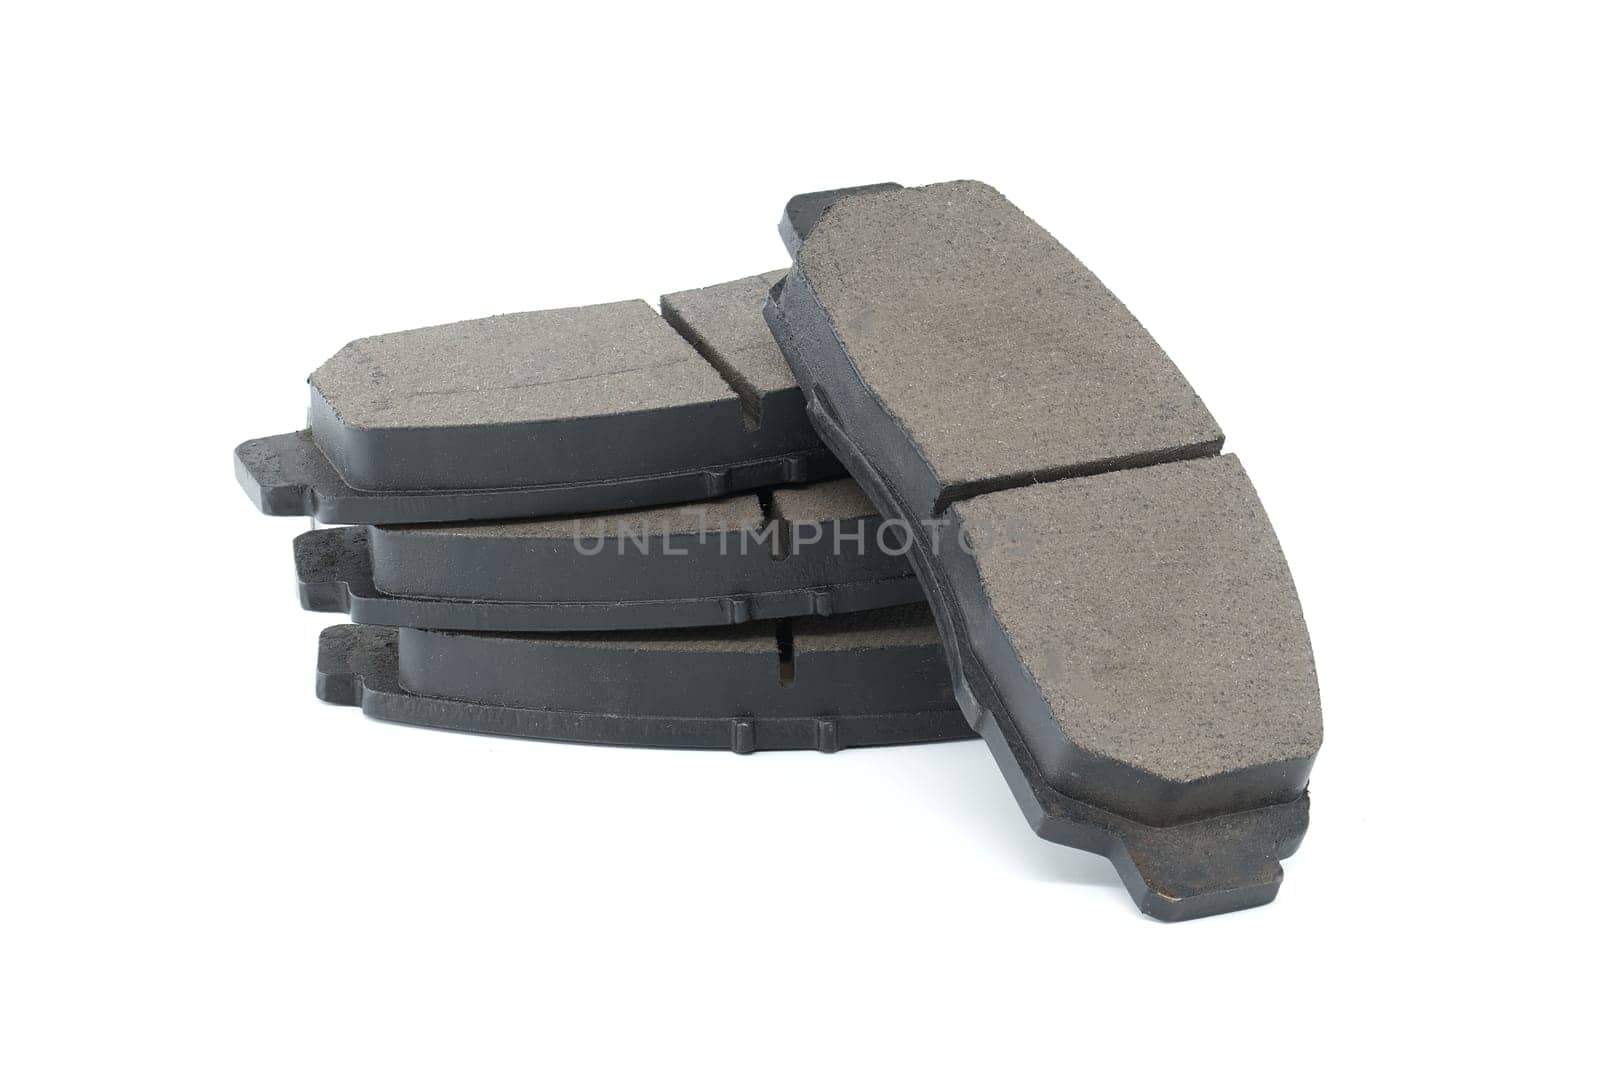 New auto brake pads isolated on white background by NetPix